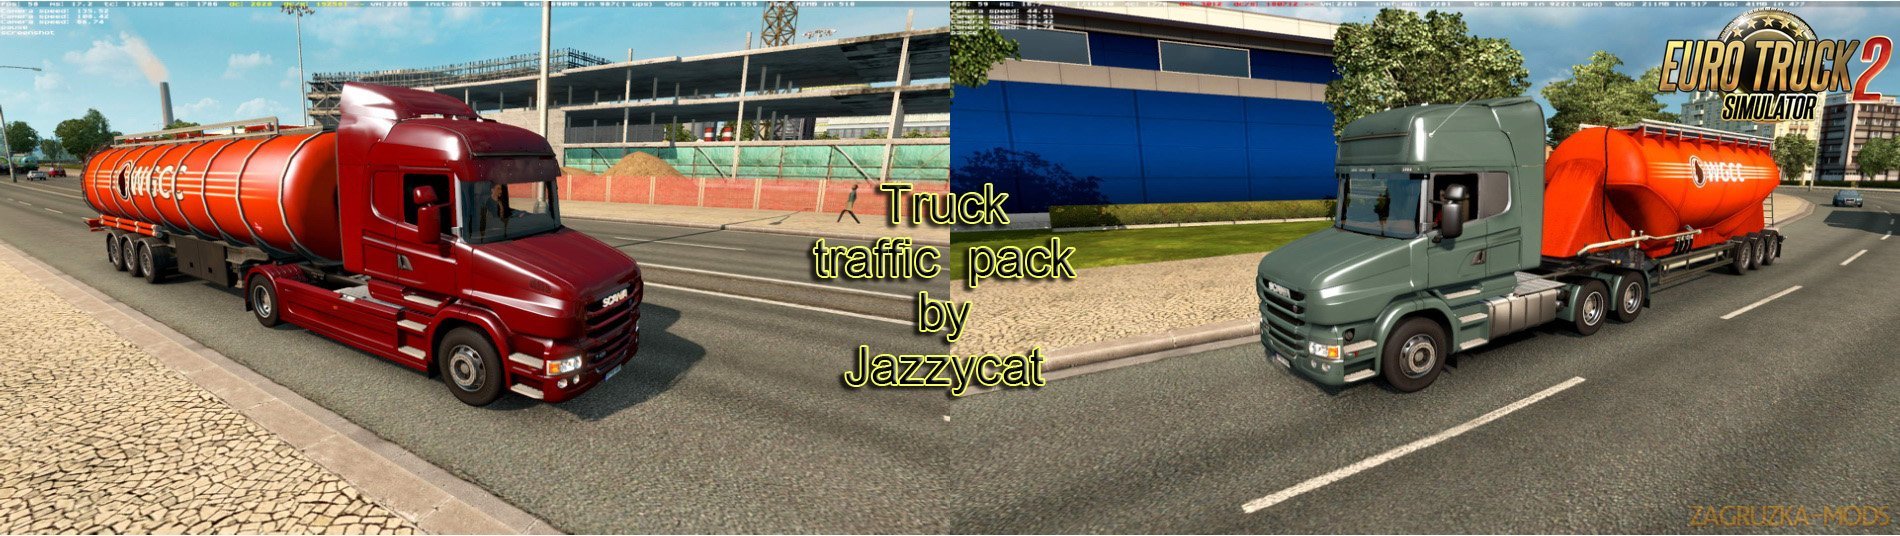 Truck Traffic Pack v2.5 by Jazzycat